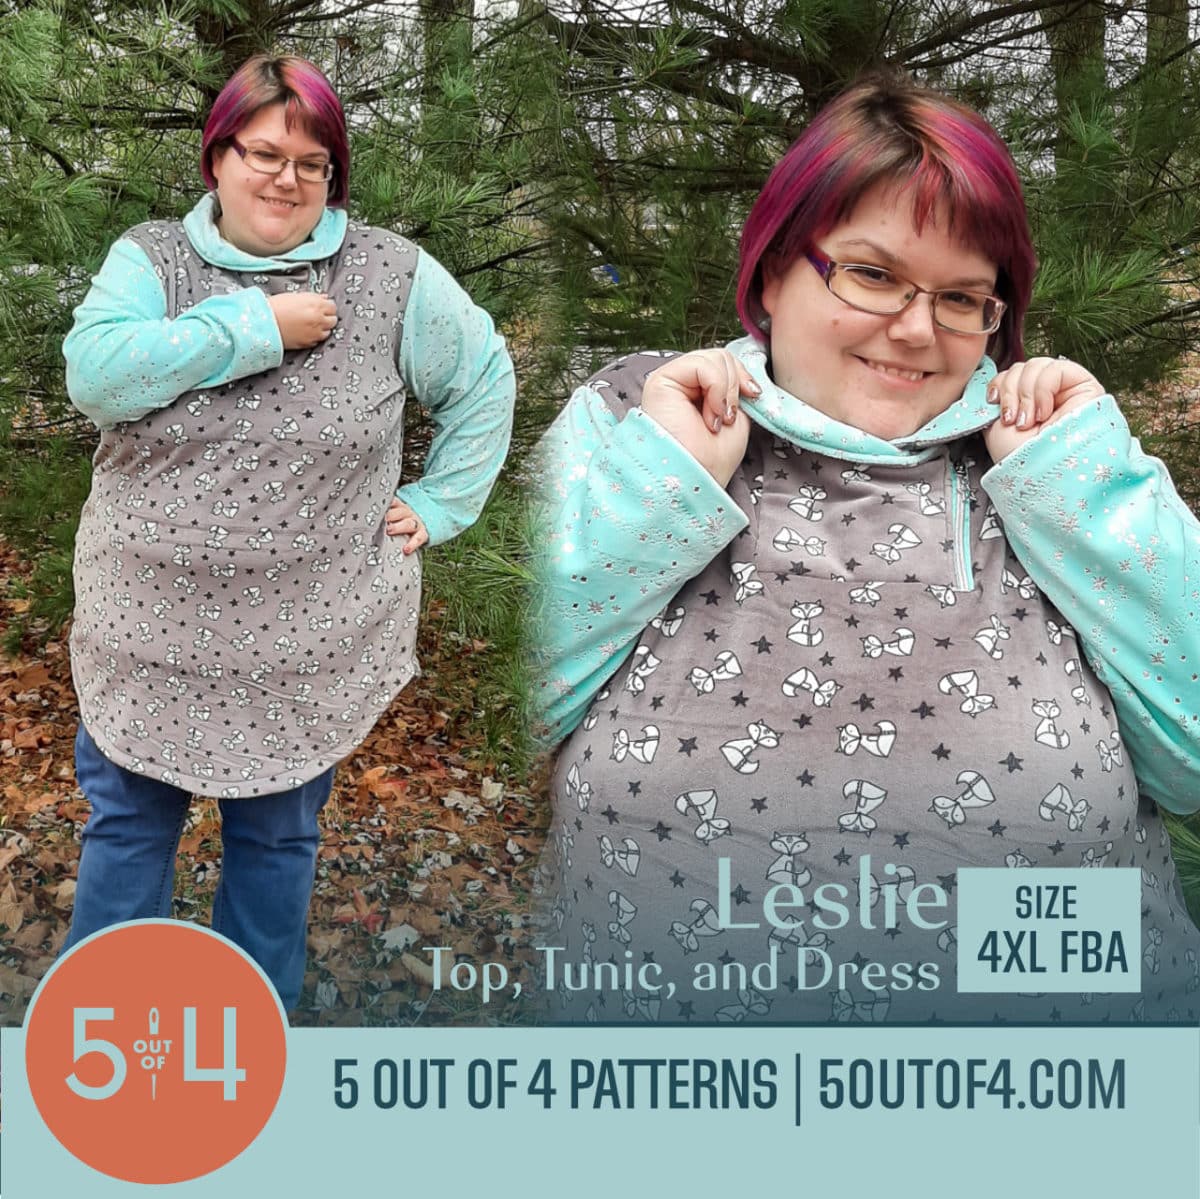 Leslie Top, Tunic, and Dress - 5 out of 4 Patterns